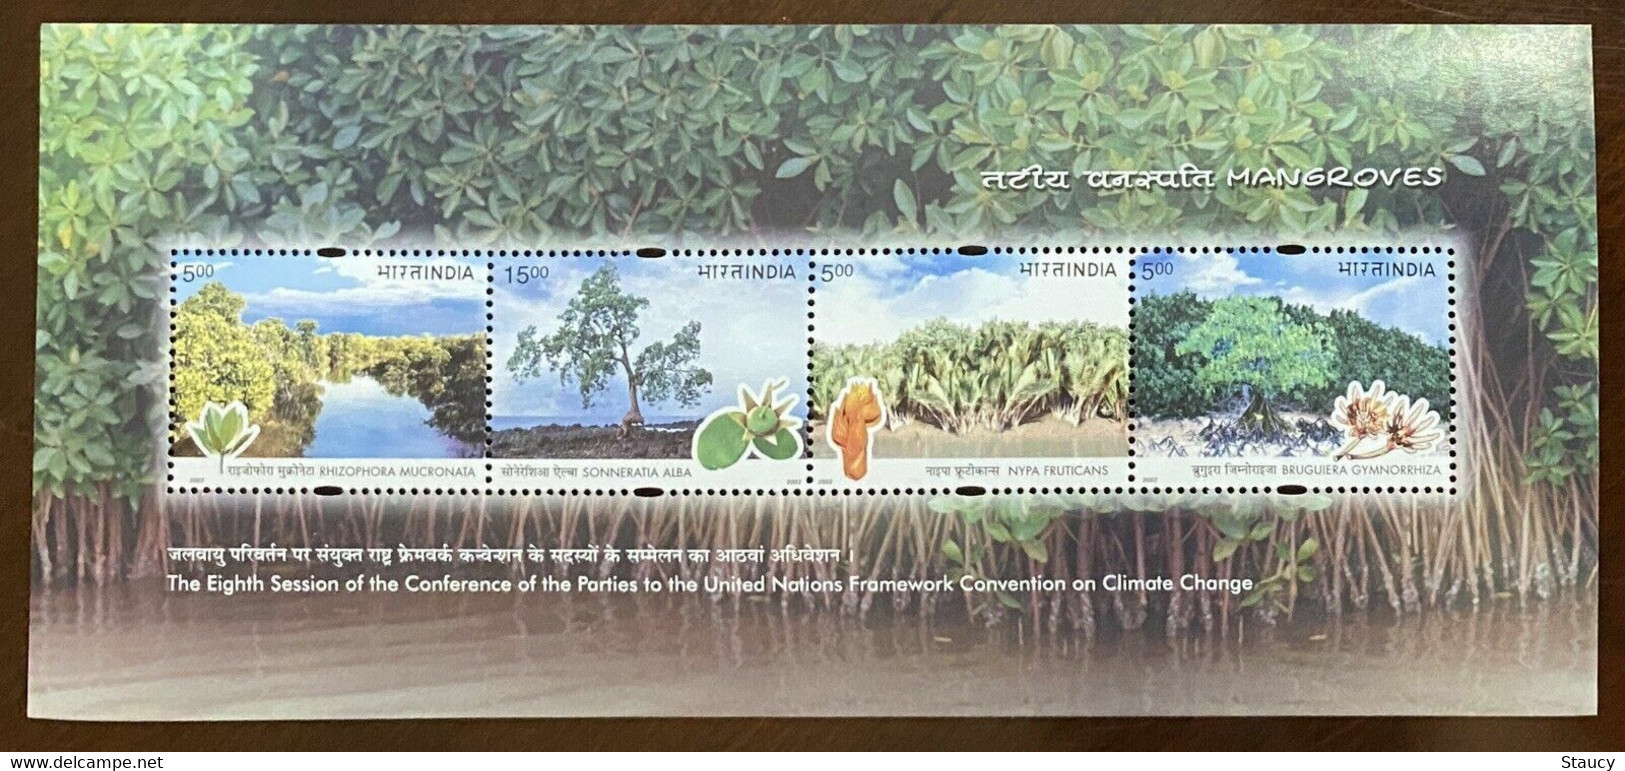 India 2002 Complete/ Full Set 4 Mini/ Miniature Sheets Year Pack Mangroves Railways Handicrafts MS MNH As Per Scan - Años Completos